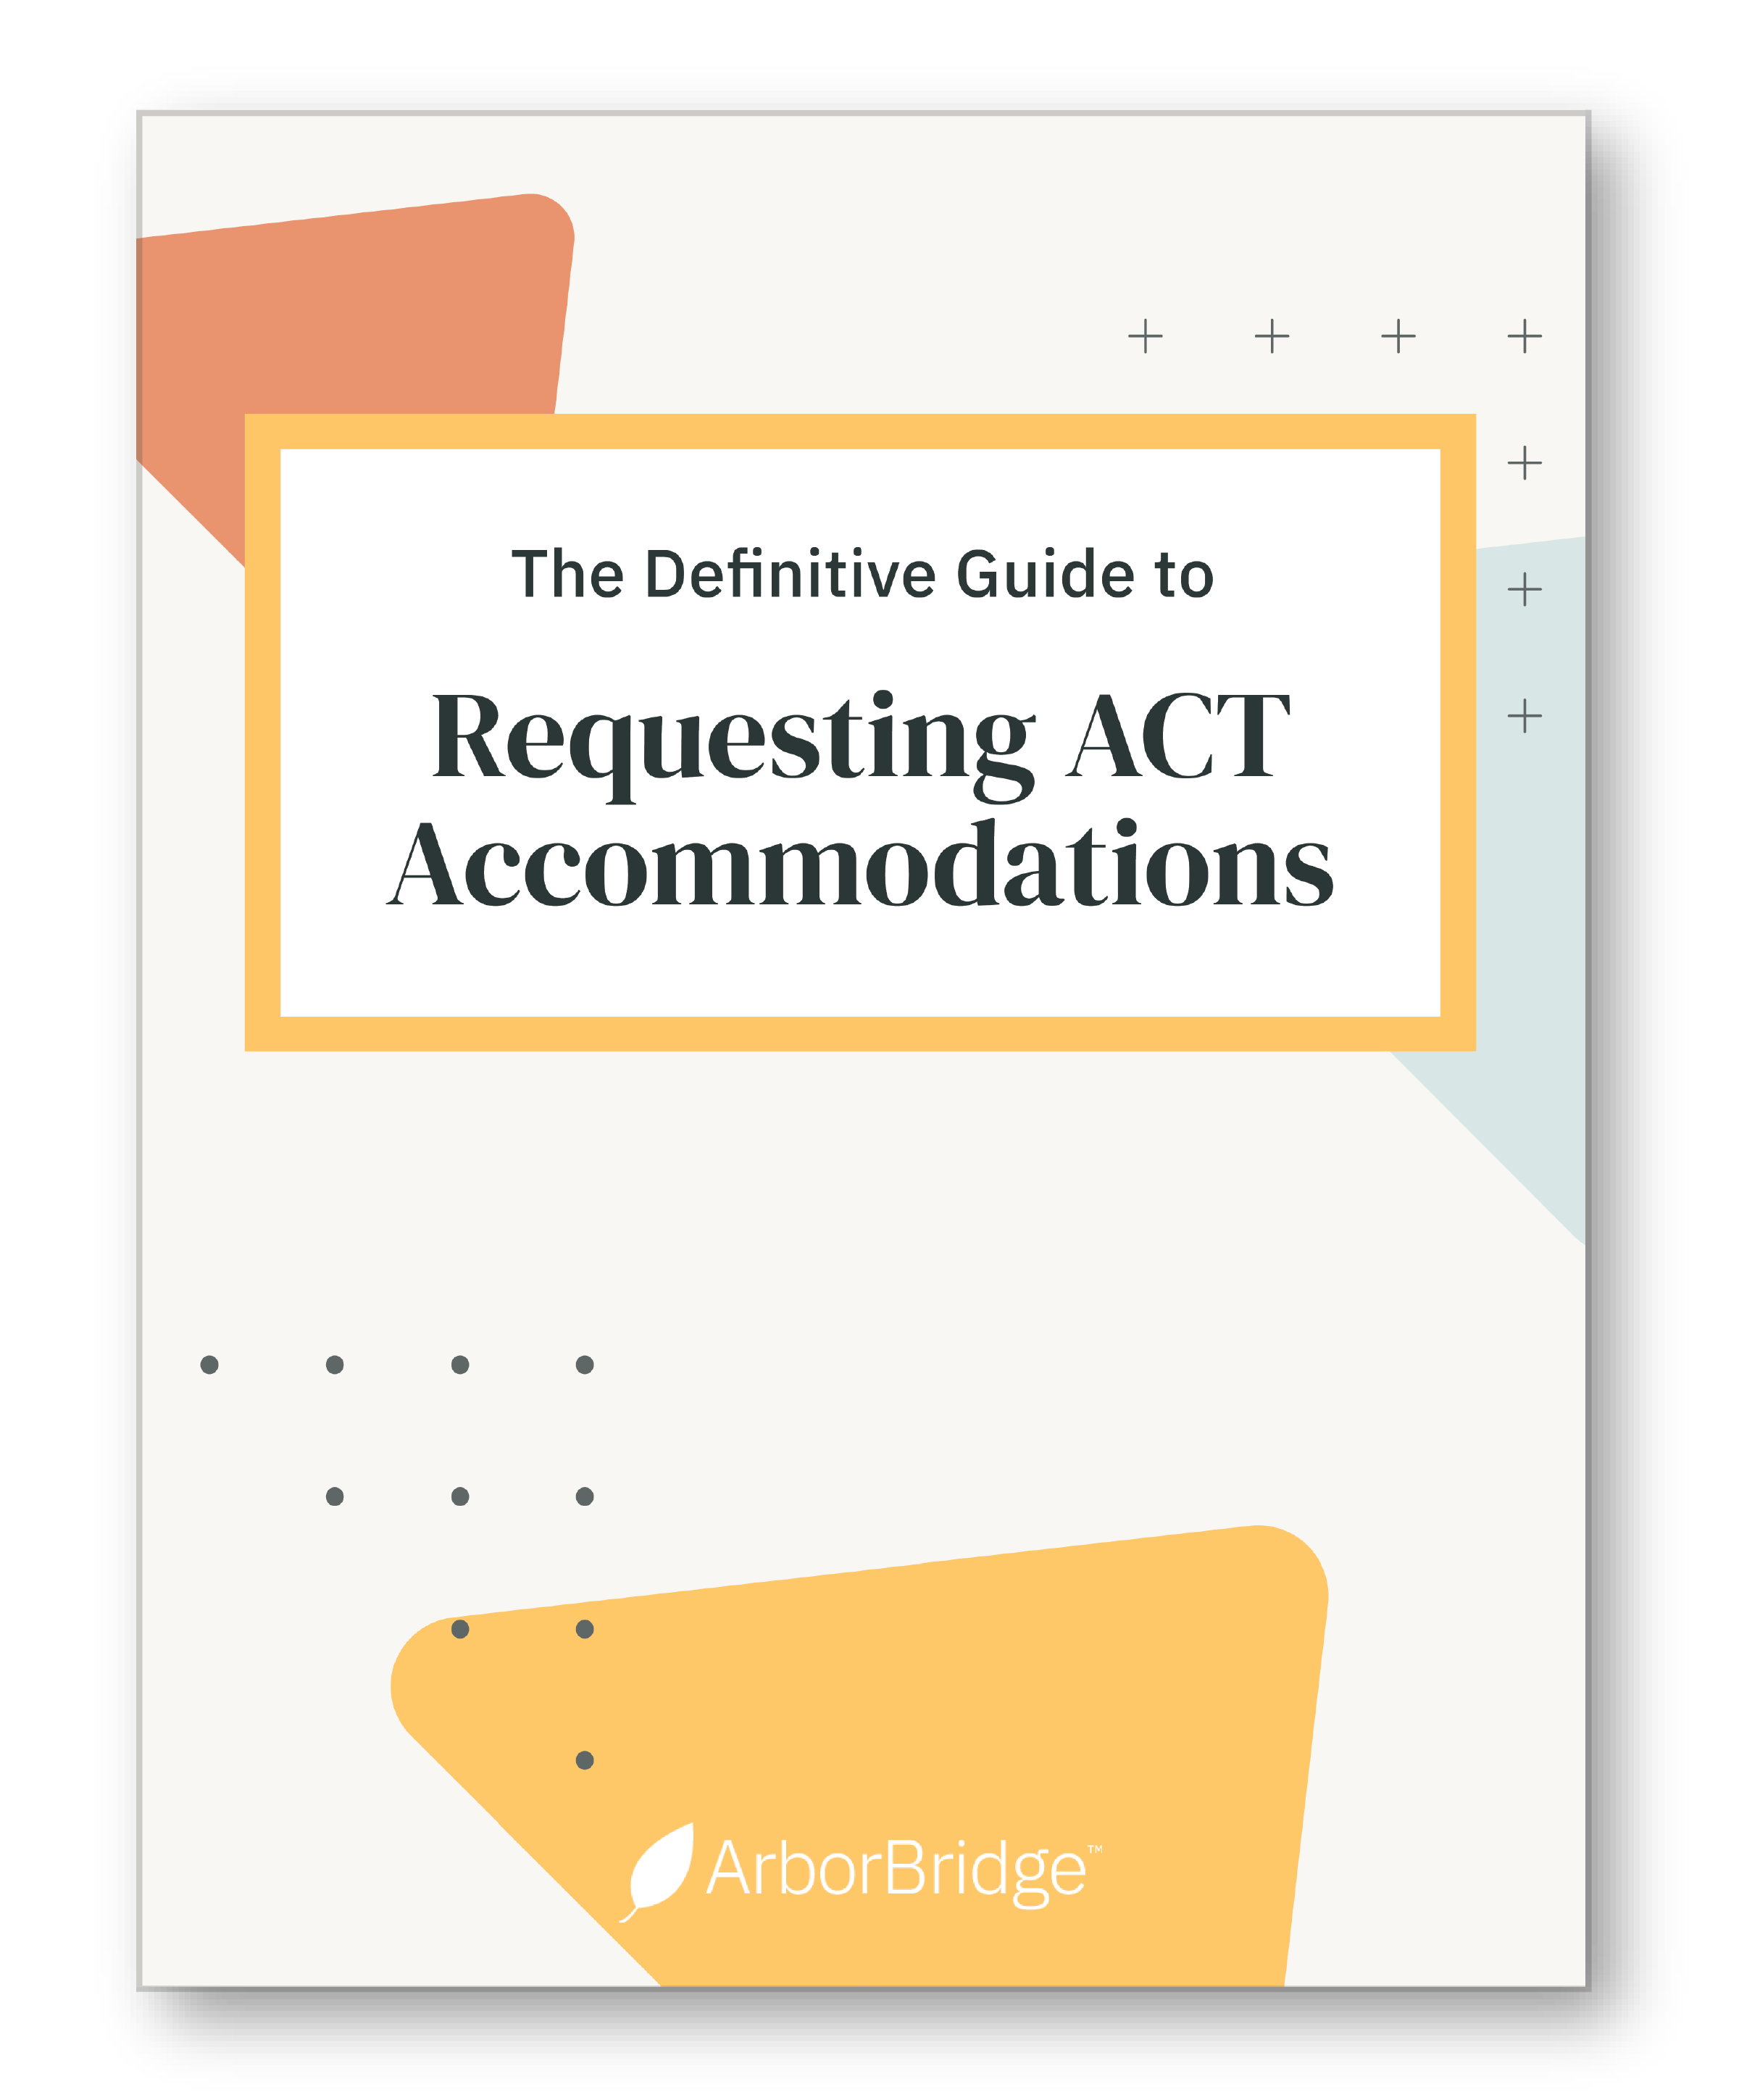 The Definitive Guide to ACT